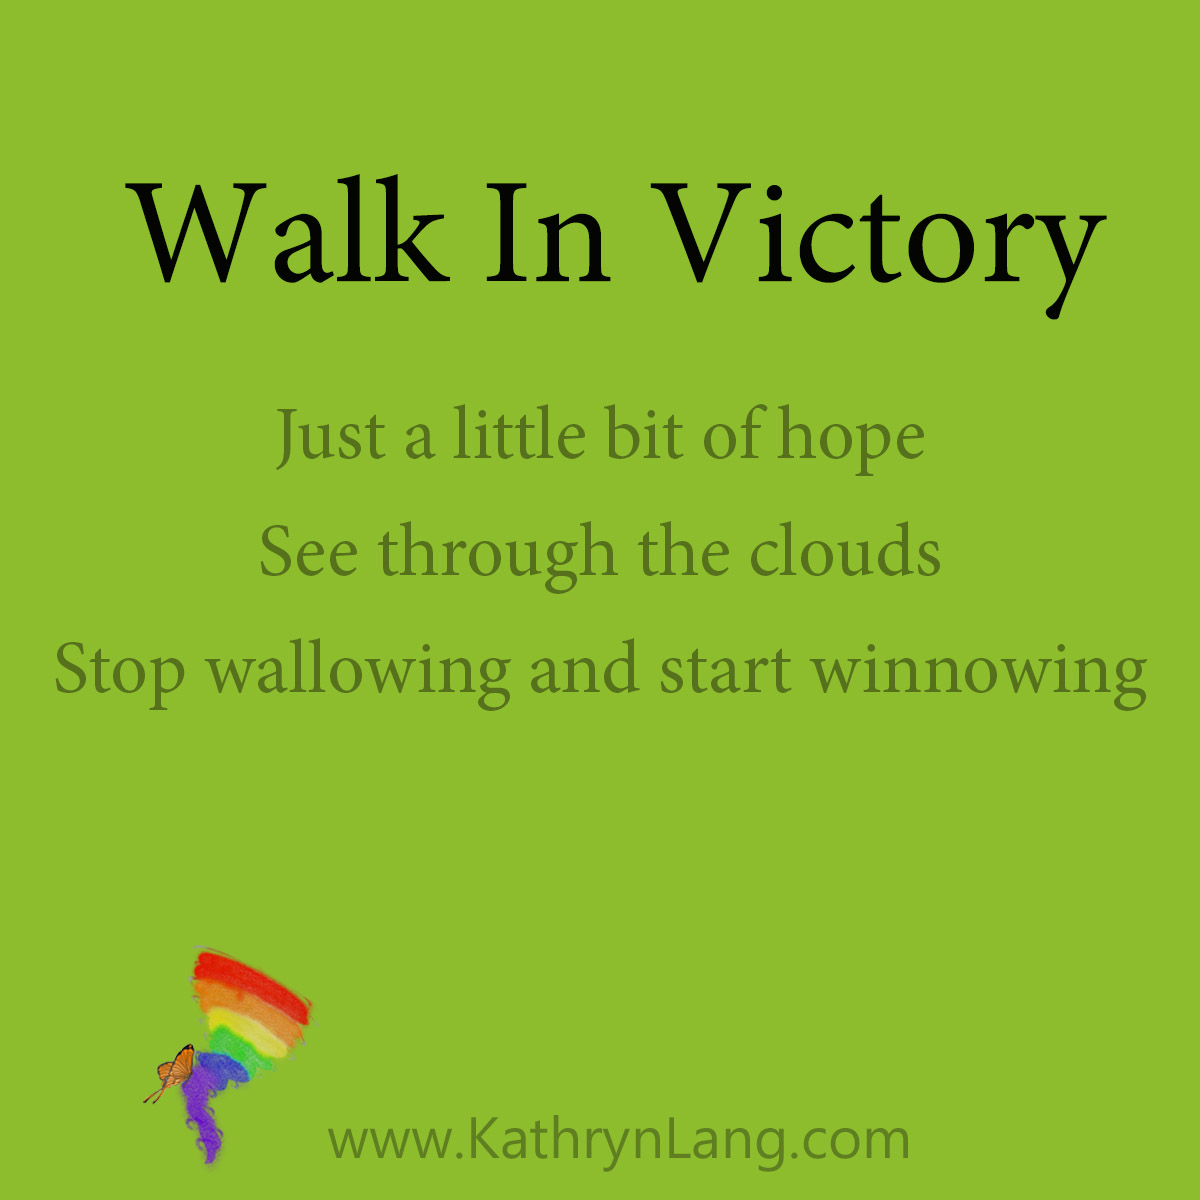 Walk In Victory

ust a little bit of hope
See through the clouds
Stop wallowing and start winnowing